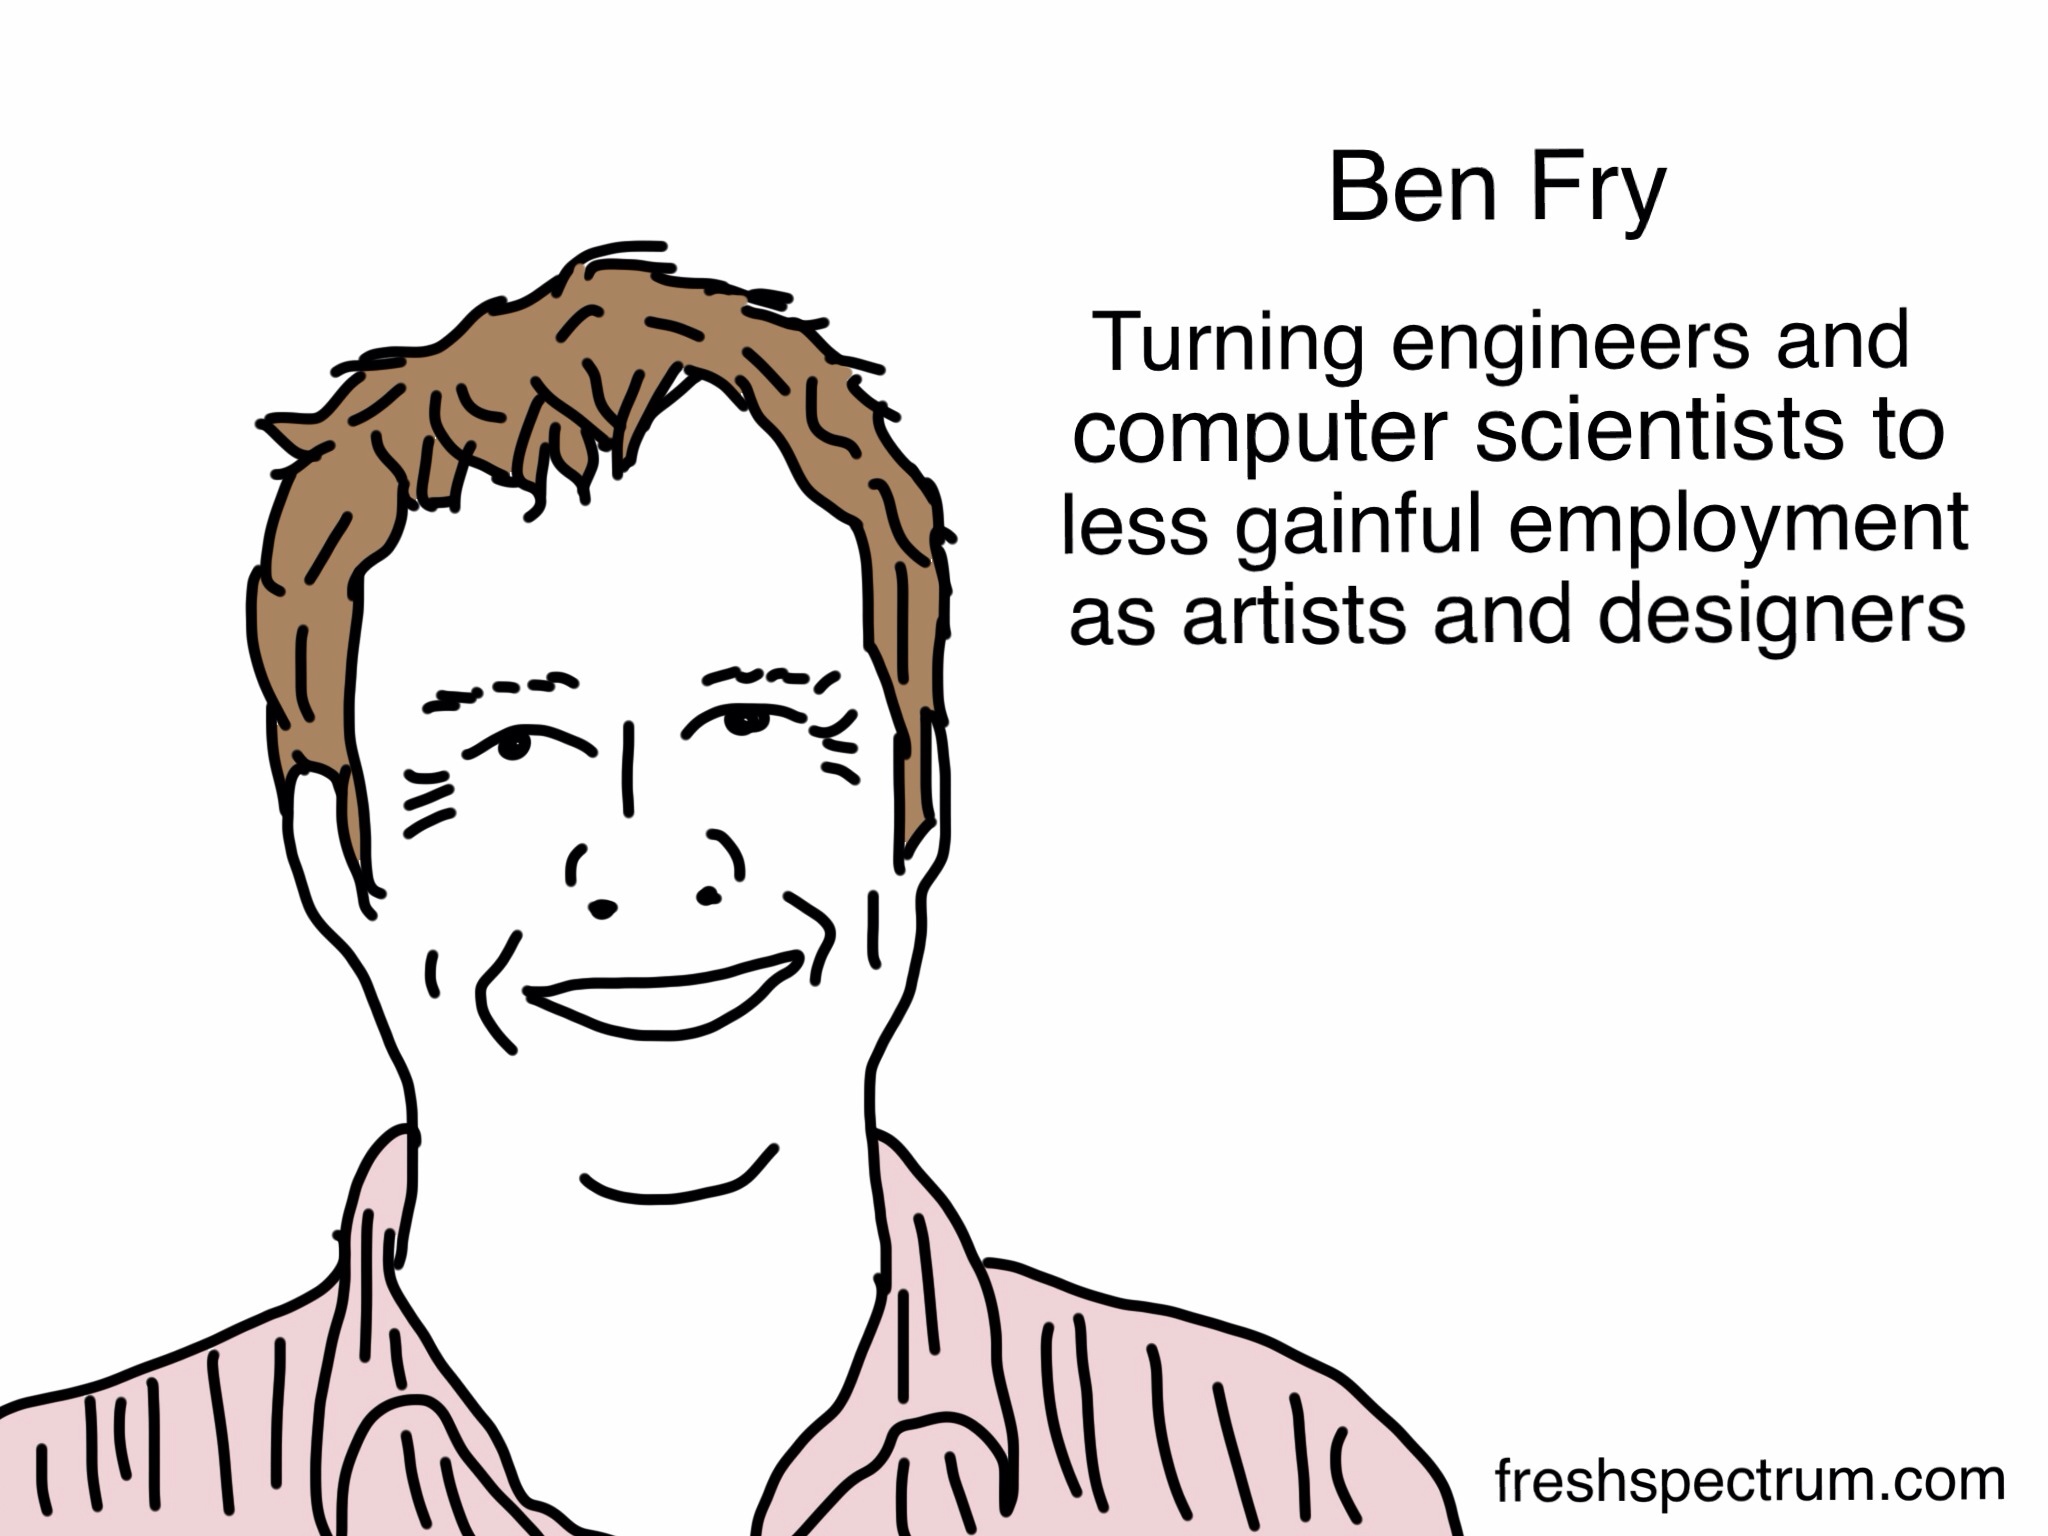 Ben Fry turning engineers and computer scientists to less gainful employment as artists and designers